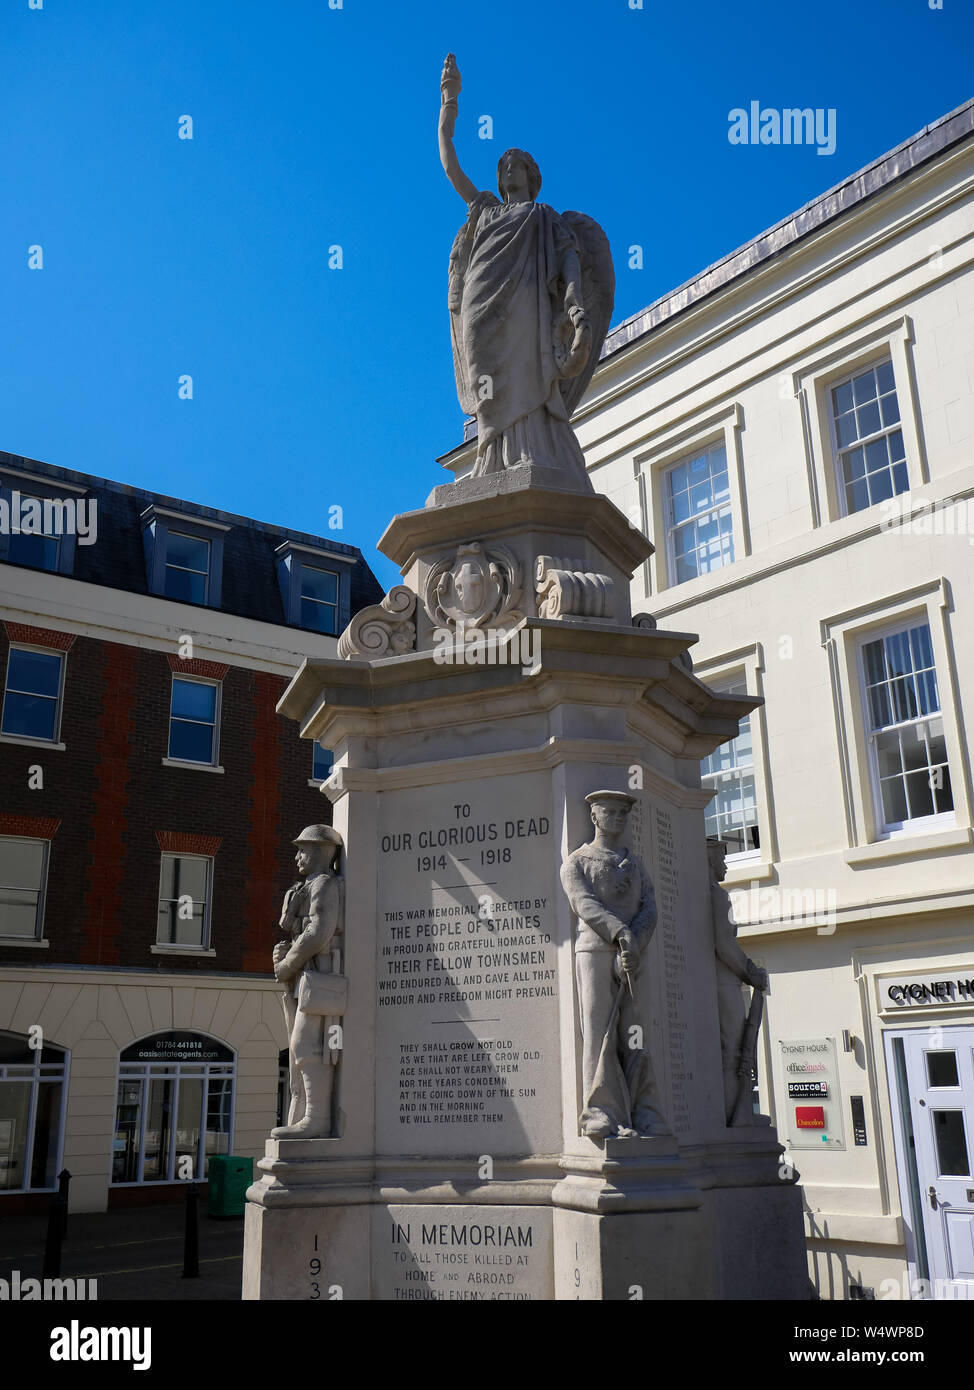 Staines-on-Thames, War Memorial, Market Square, Surrey, England, UK, GB. Stock Photo